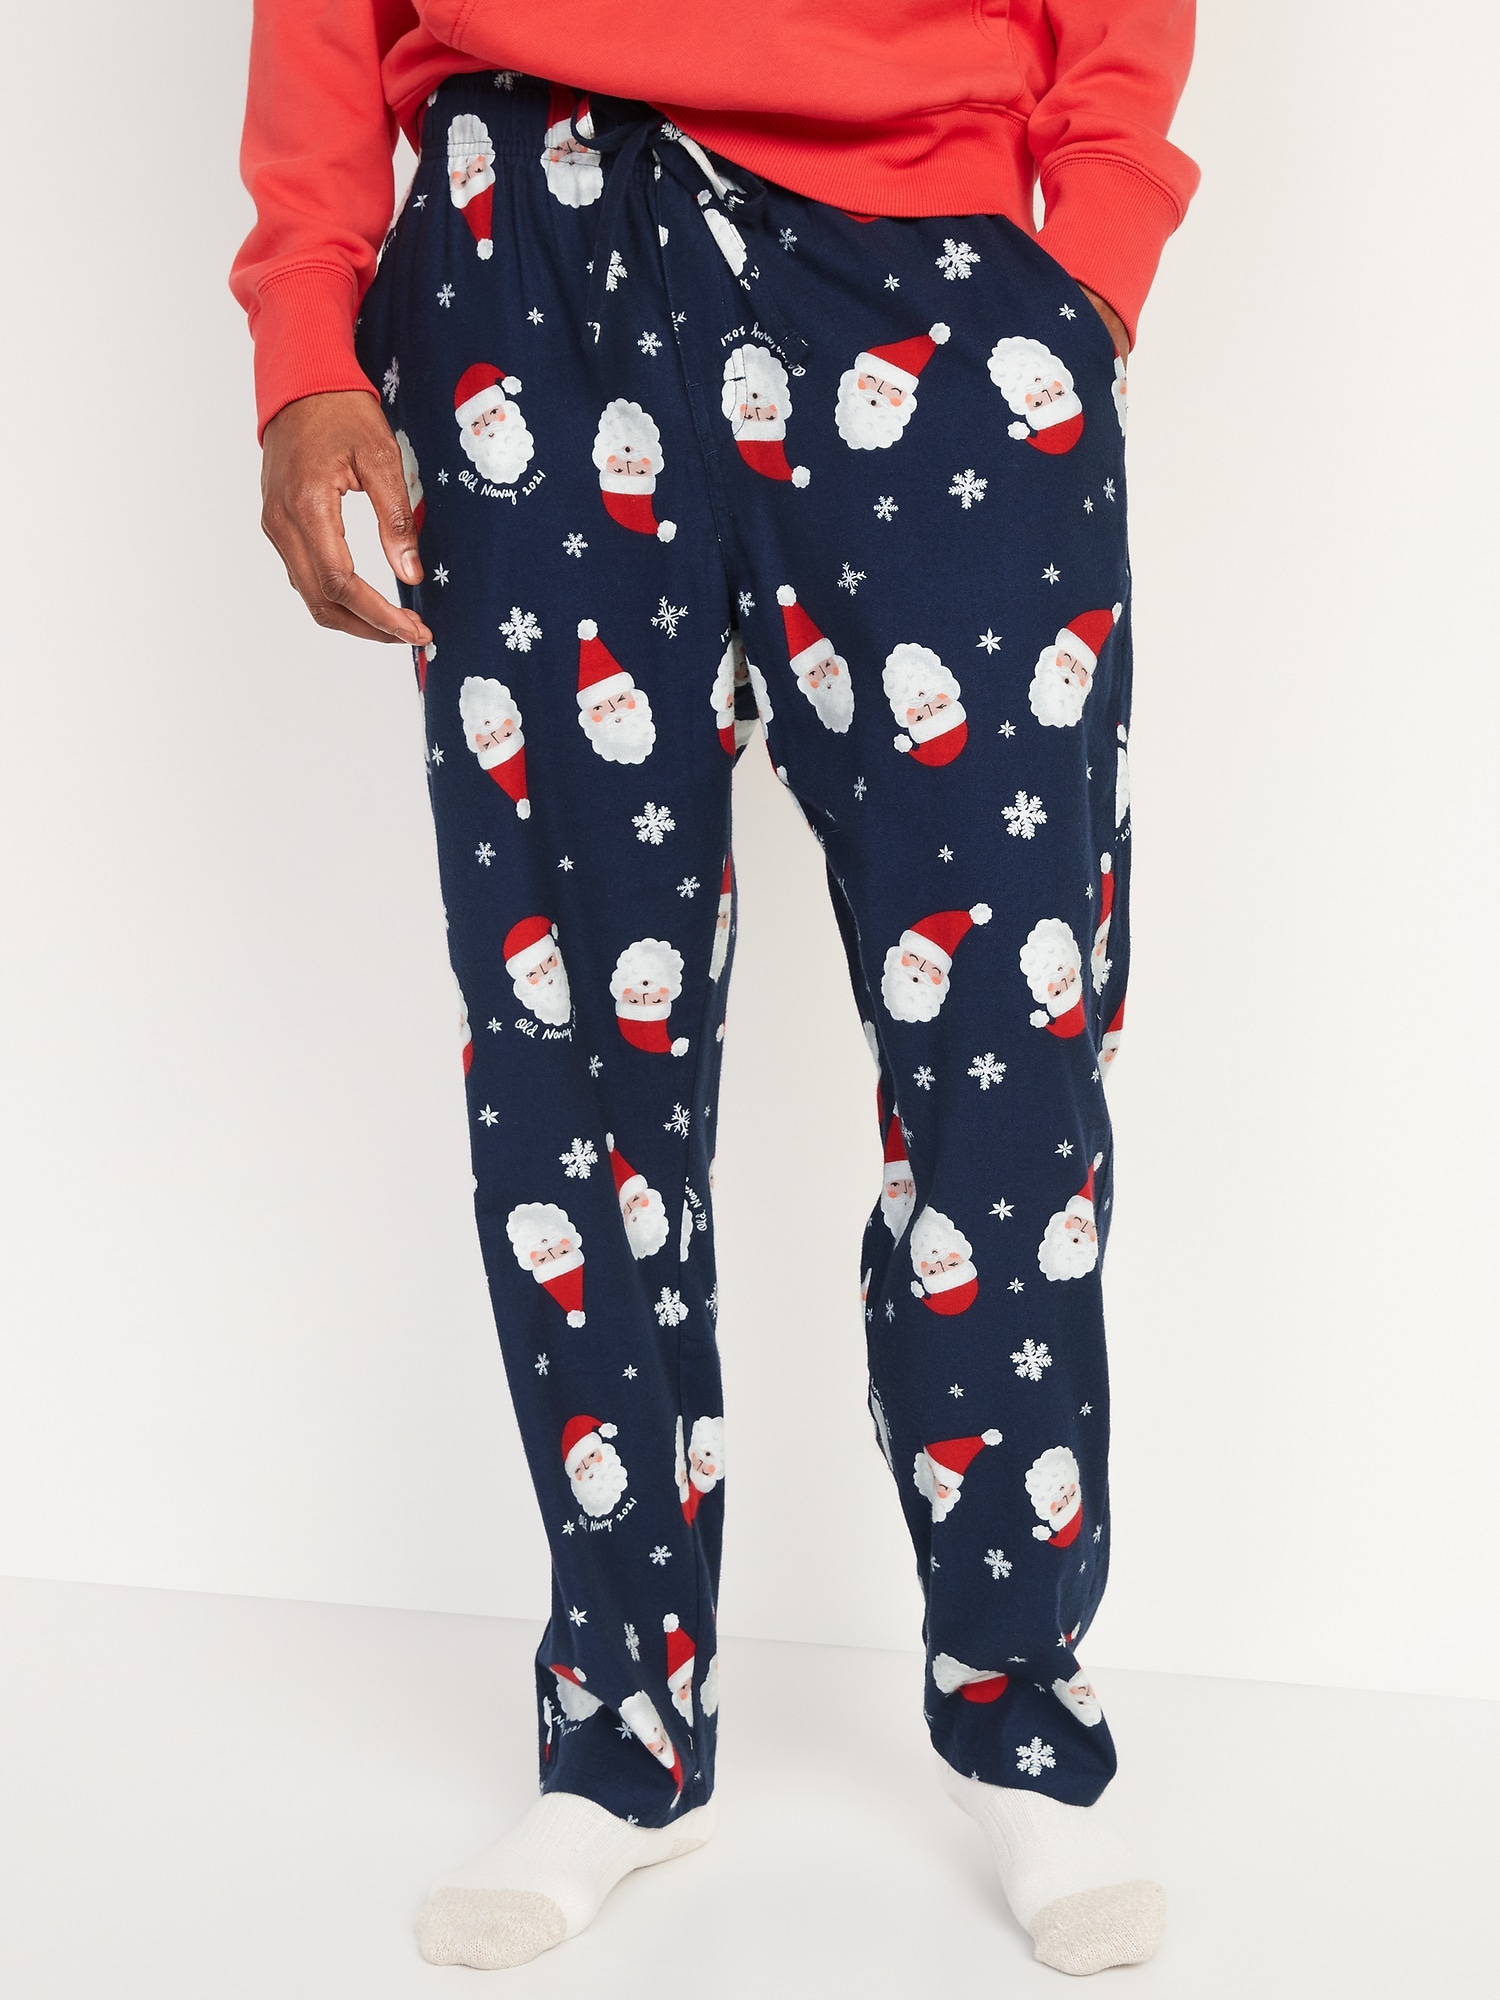 Printed Flannel Pajama Pants for Men Old Navy